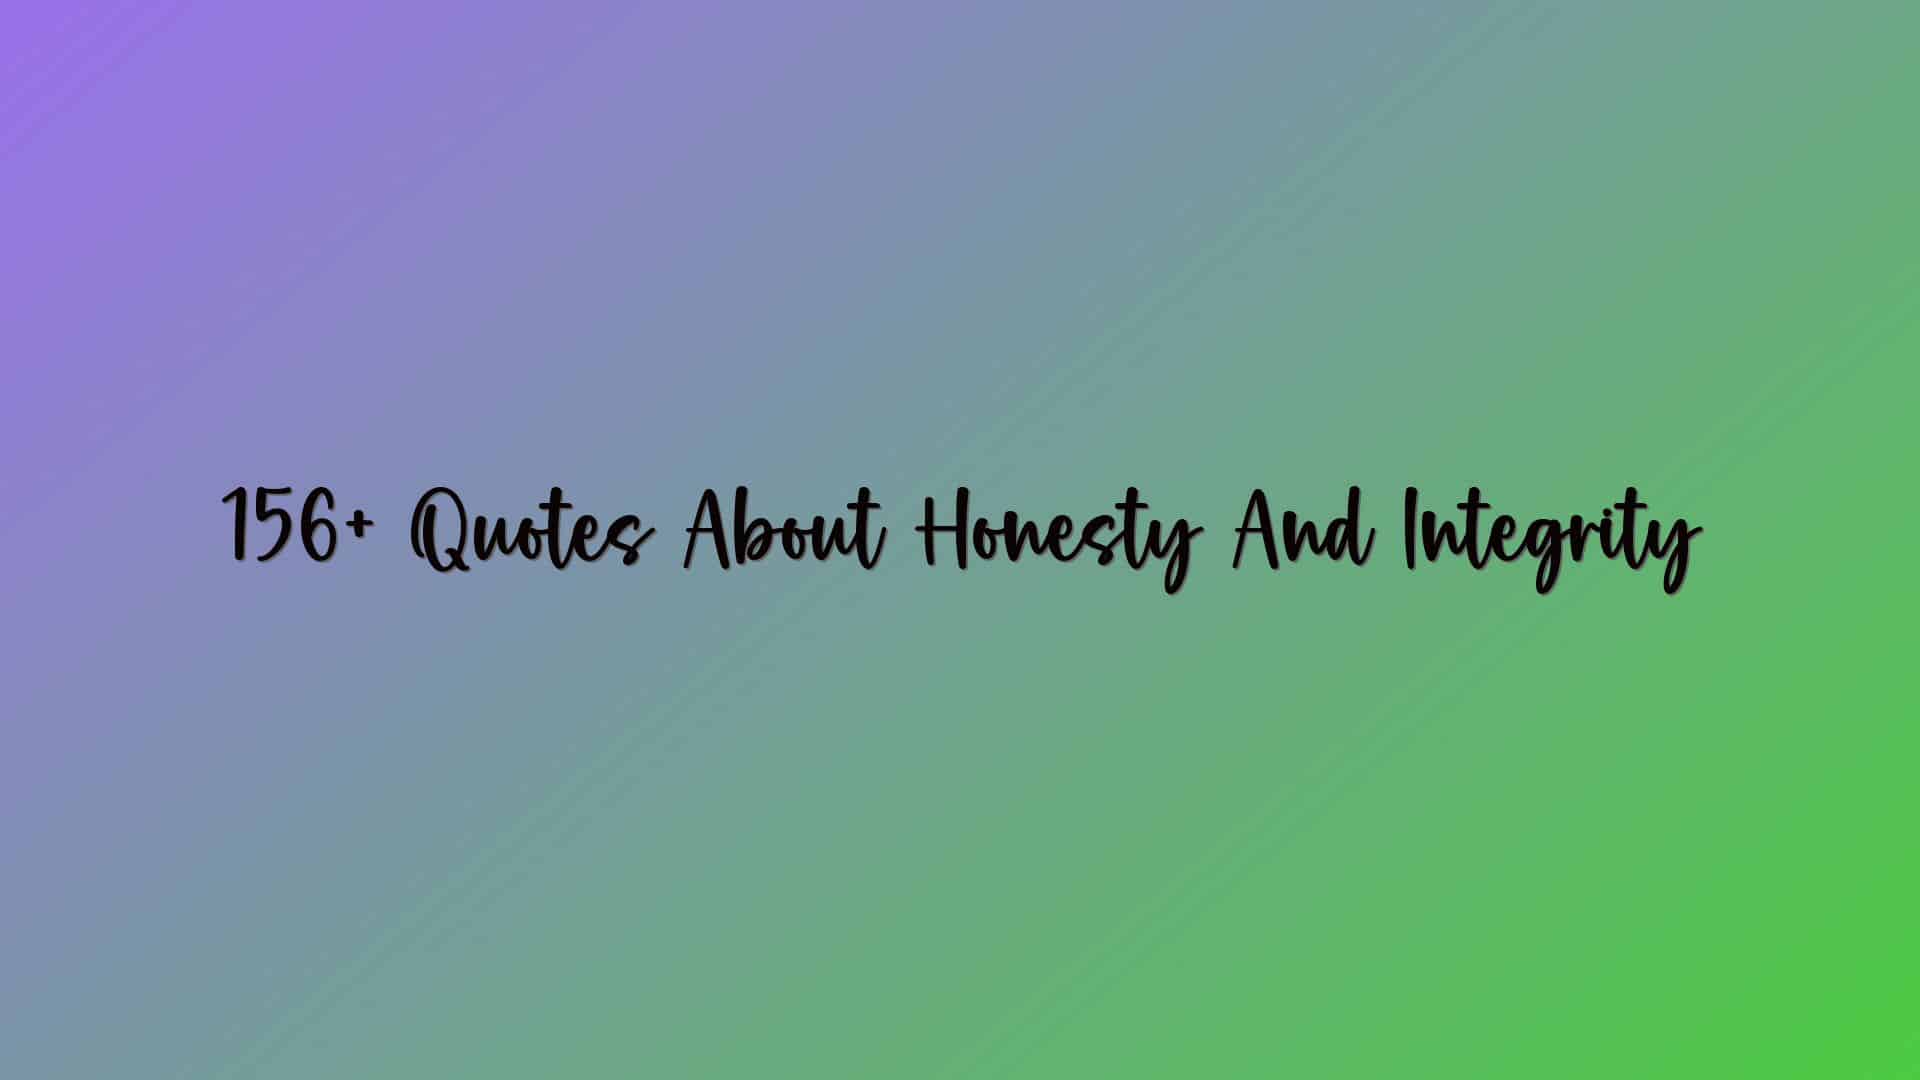 156+ Quotes About Honesty And Integrity